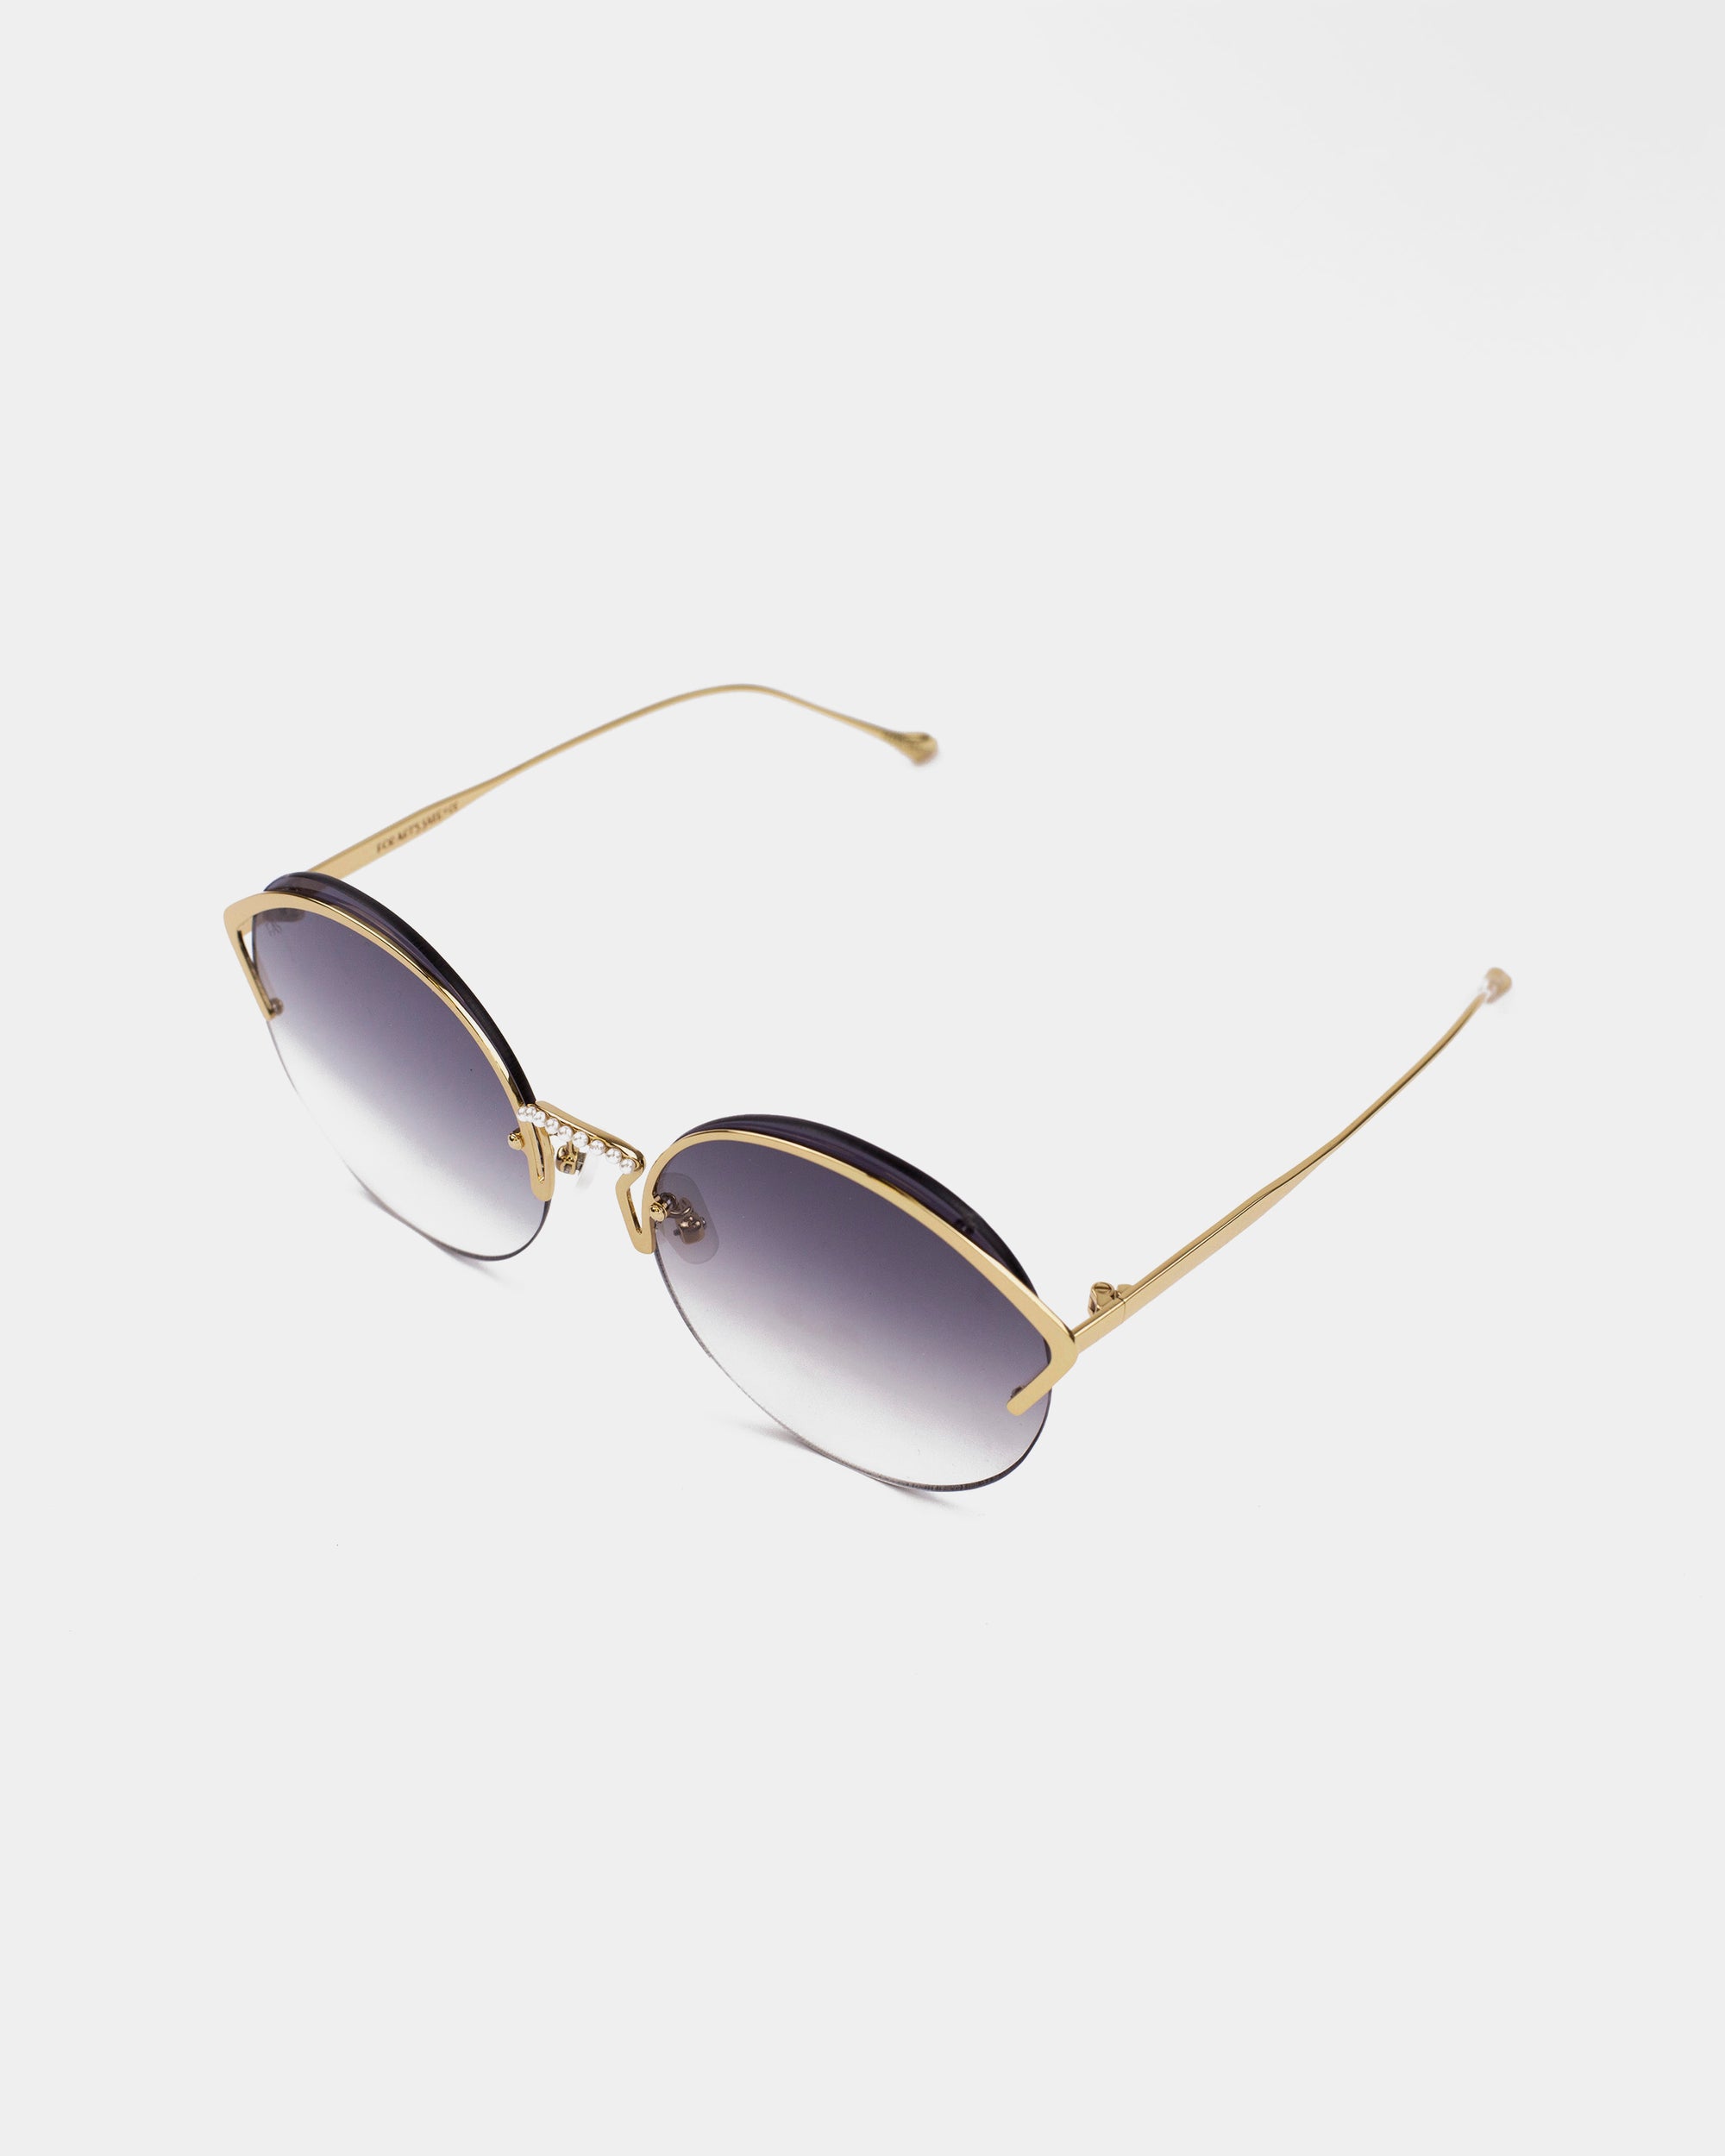 A pair of stylish round sunglasses with gradient nylon lenses and thin gold, stainless steel frames. The glasses are set against a plain white background, showcasing their elegant design, UV protection, and slim metal temples with small end tips. These are the Margarita sunglasses by For Art&#39;s Sake®.